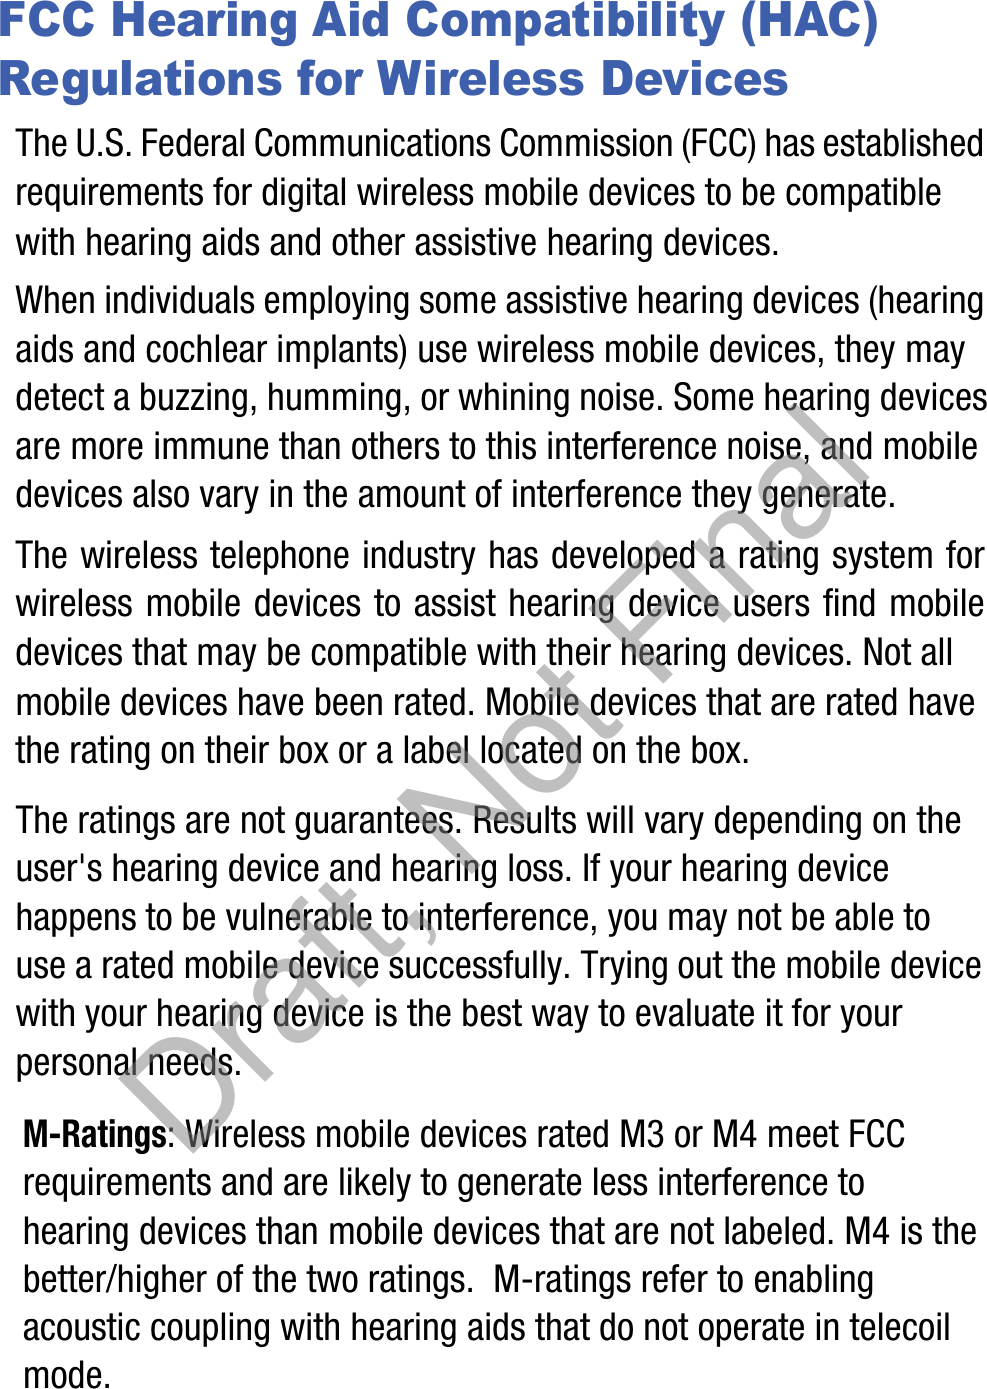 FCC Hearing Aid Compatibility (HAC) Regulations for Wireless DevicesThe U.S. Federal Communications Commission (FCC) has established requirements for digital wireless mobile devices to be compatible with hearing aids and other assistive hearing devices.When individuals employing some assistive hearing devices (hearing aids and cochlear implants) use wireless mobile devices, they may detect a buzzing, humming, or whining noise. Some hearing devices are more immune than others to this interference noise, and mobile devices also vary in the amount of interference they generate.The wireless telephone industry has developed a rating system for wireless mobile devices to assist hearing device users find mobile devices that may be compatible with their hearing devices. Not all mobile devices have been rated. Mobile devices that are rated have the rating on their box or a label located on the box.The ratings are not guarantees. Results will vary depending on the user&apos;s hearing device and hearing loss. If your hearing device happens to be vulnerable to interference, you may not be able to use a rated mobile device successfully. Trying out the mobile device with your hearing device is the best way to evaluate it for your personal needs.M-Ratings: Wireless mobile devices rated M3 or M4 meet FCC requirements and are likely to generate less interference to hearing devices than mobile devices that are not labeled. M4 is the better/higher of the two ratings.  M-ratings refer to enabling acoustic coupling with hearing aids that do not operate in telecoil mode.Draft, Not Final